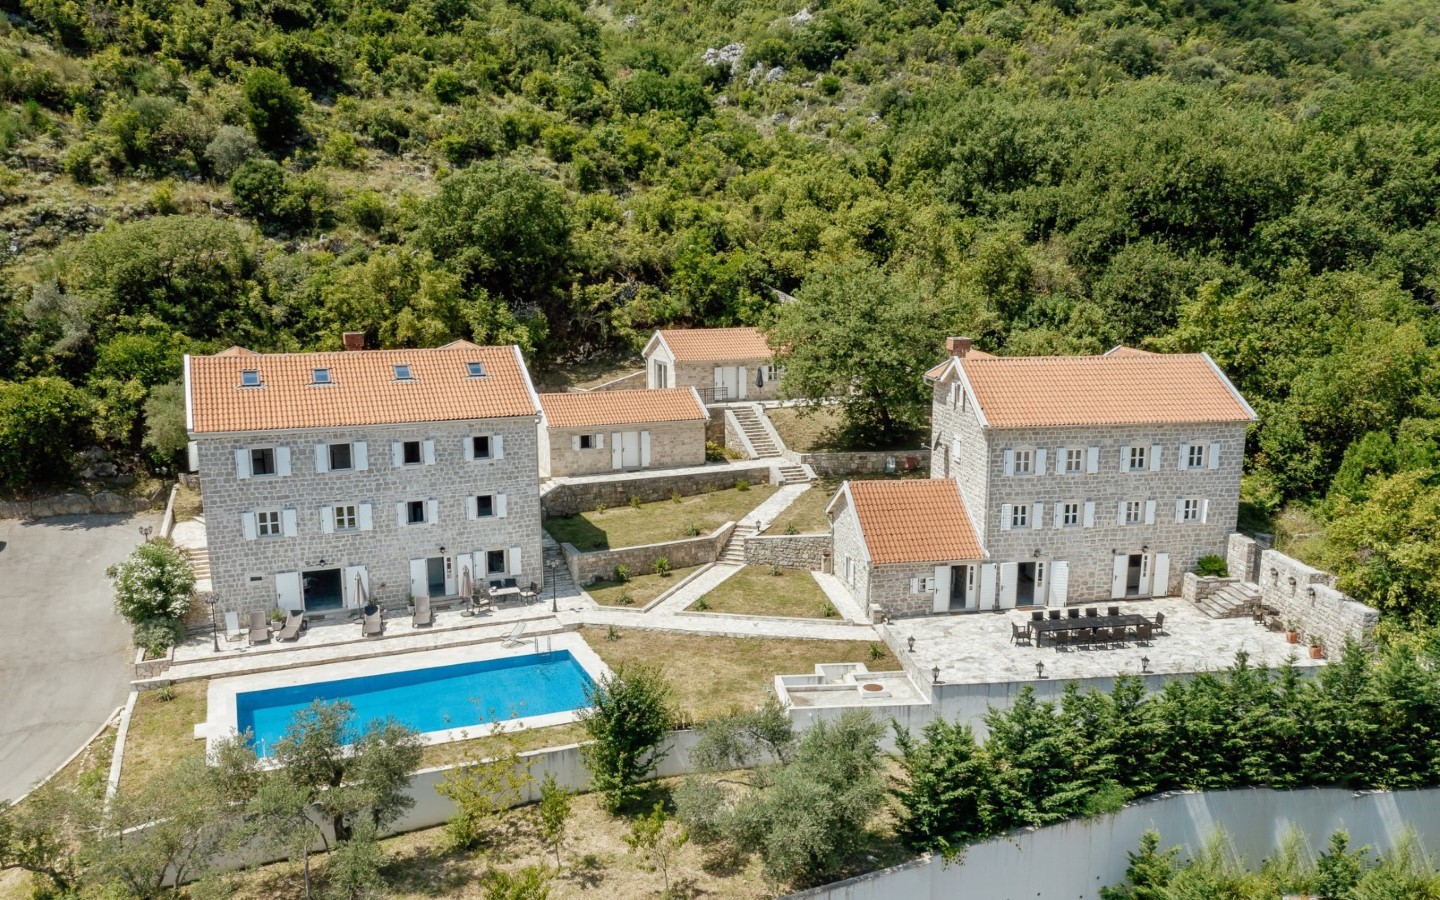 Kotor, Prčanj - complex of renovated stone villas and houses with a pool